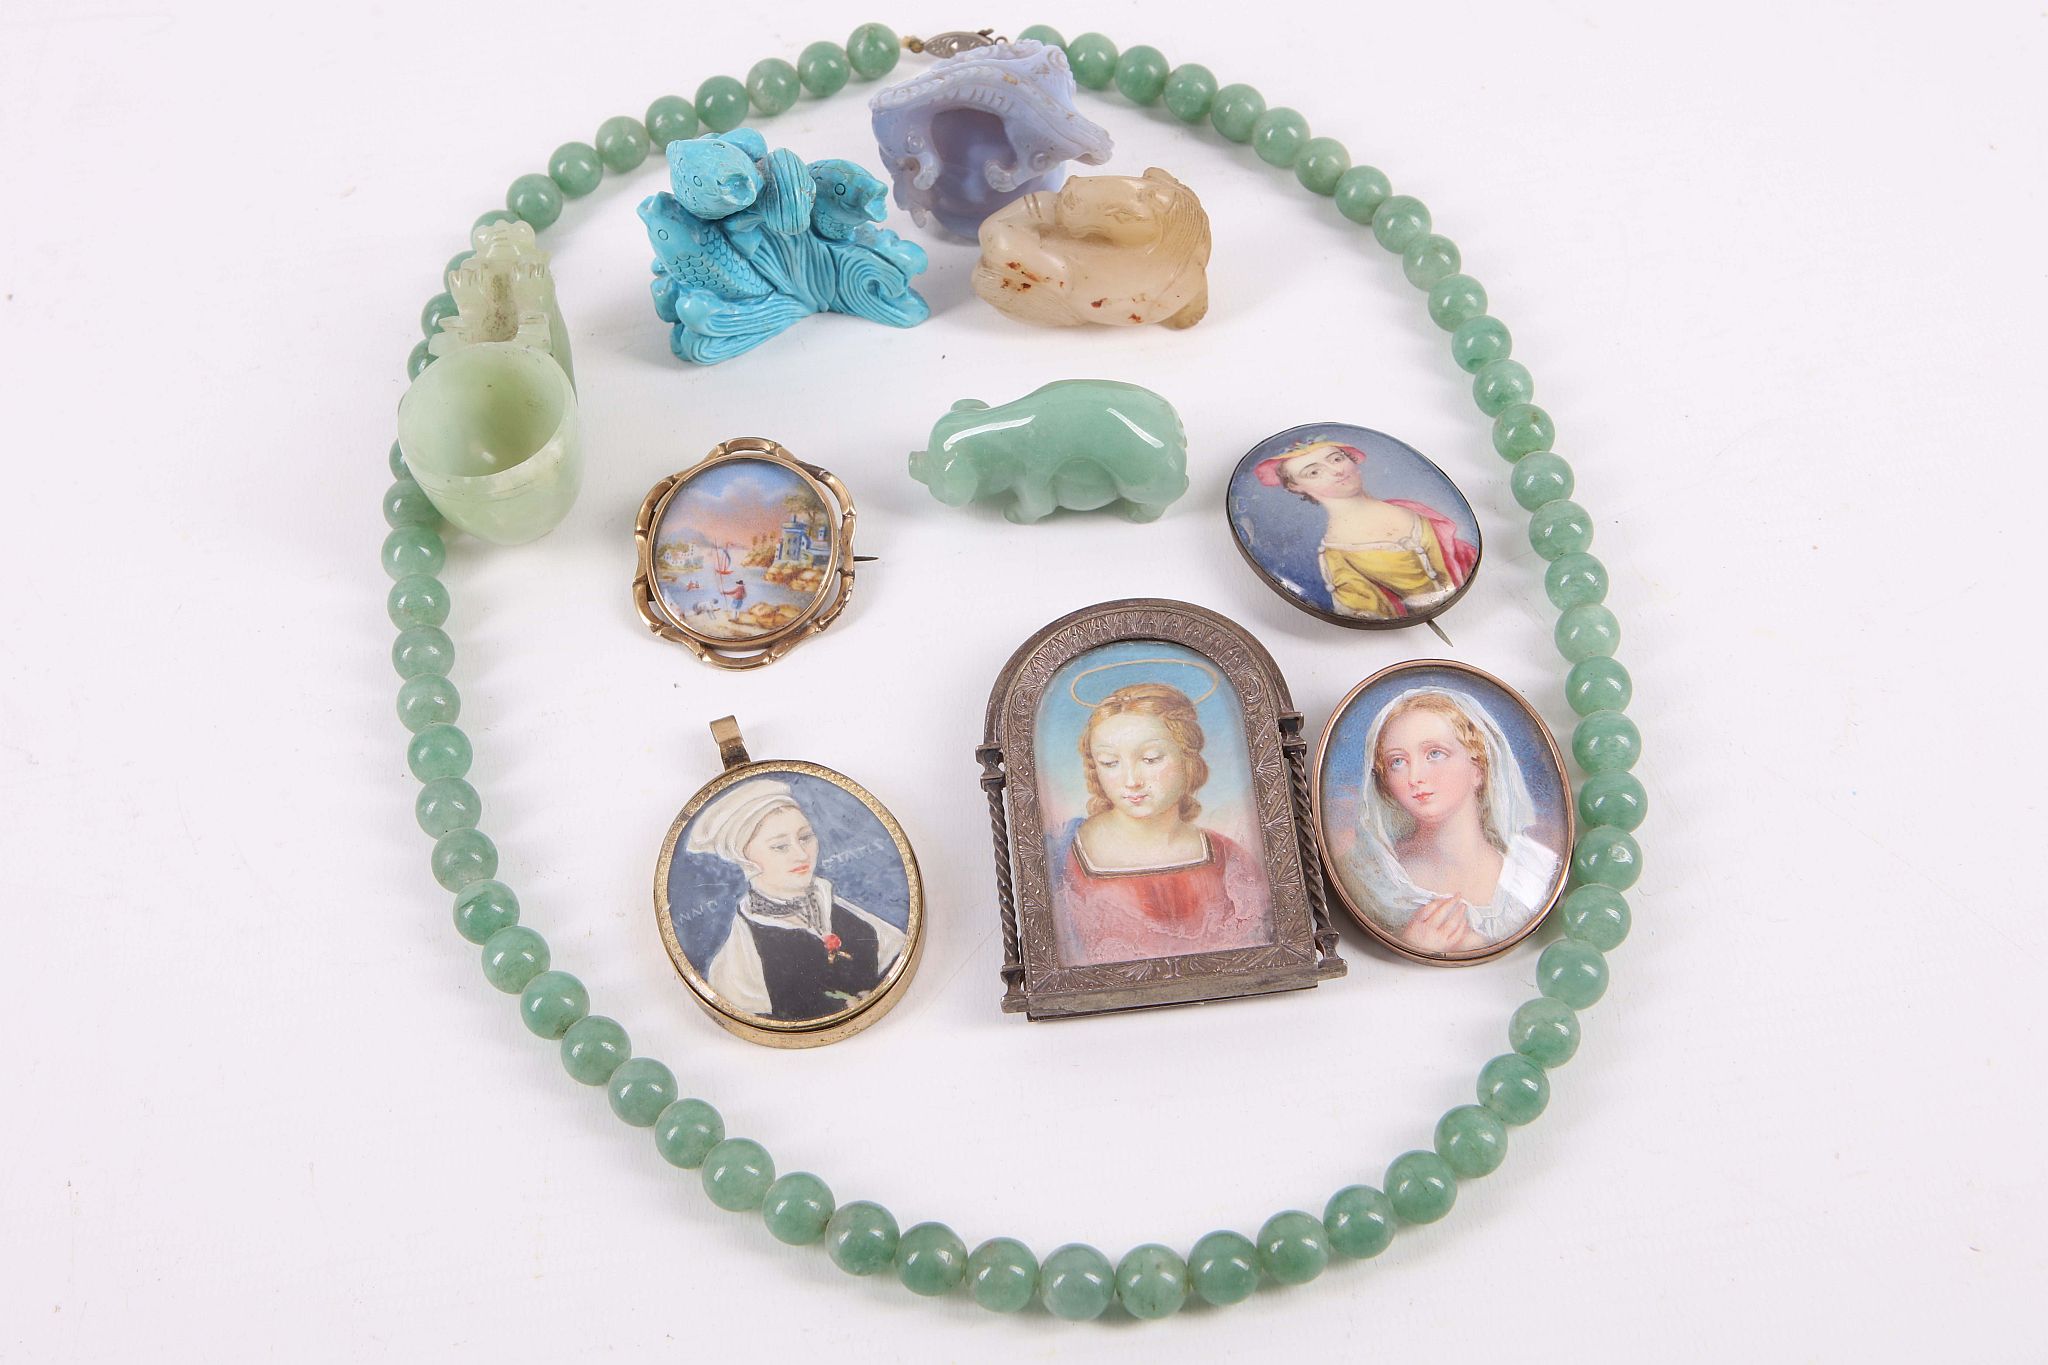 An interesting miscellaneous collection of Oriental items and European miniatures, to include jade